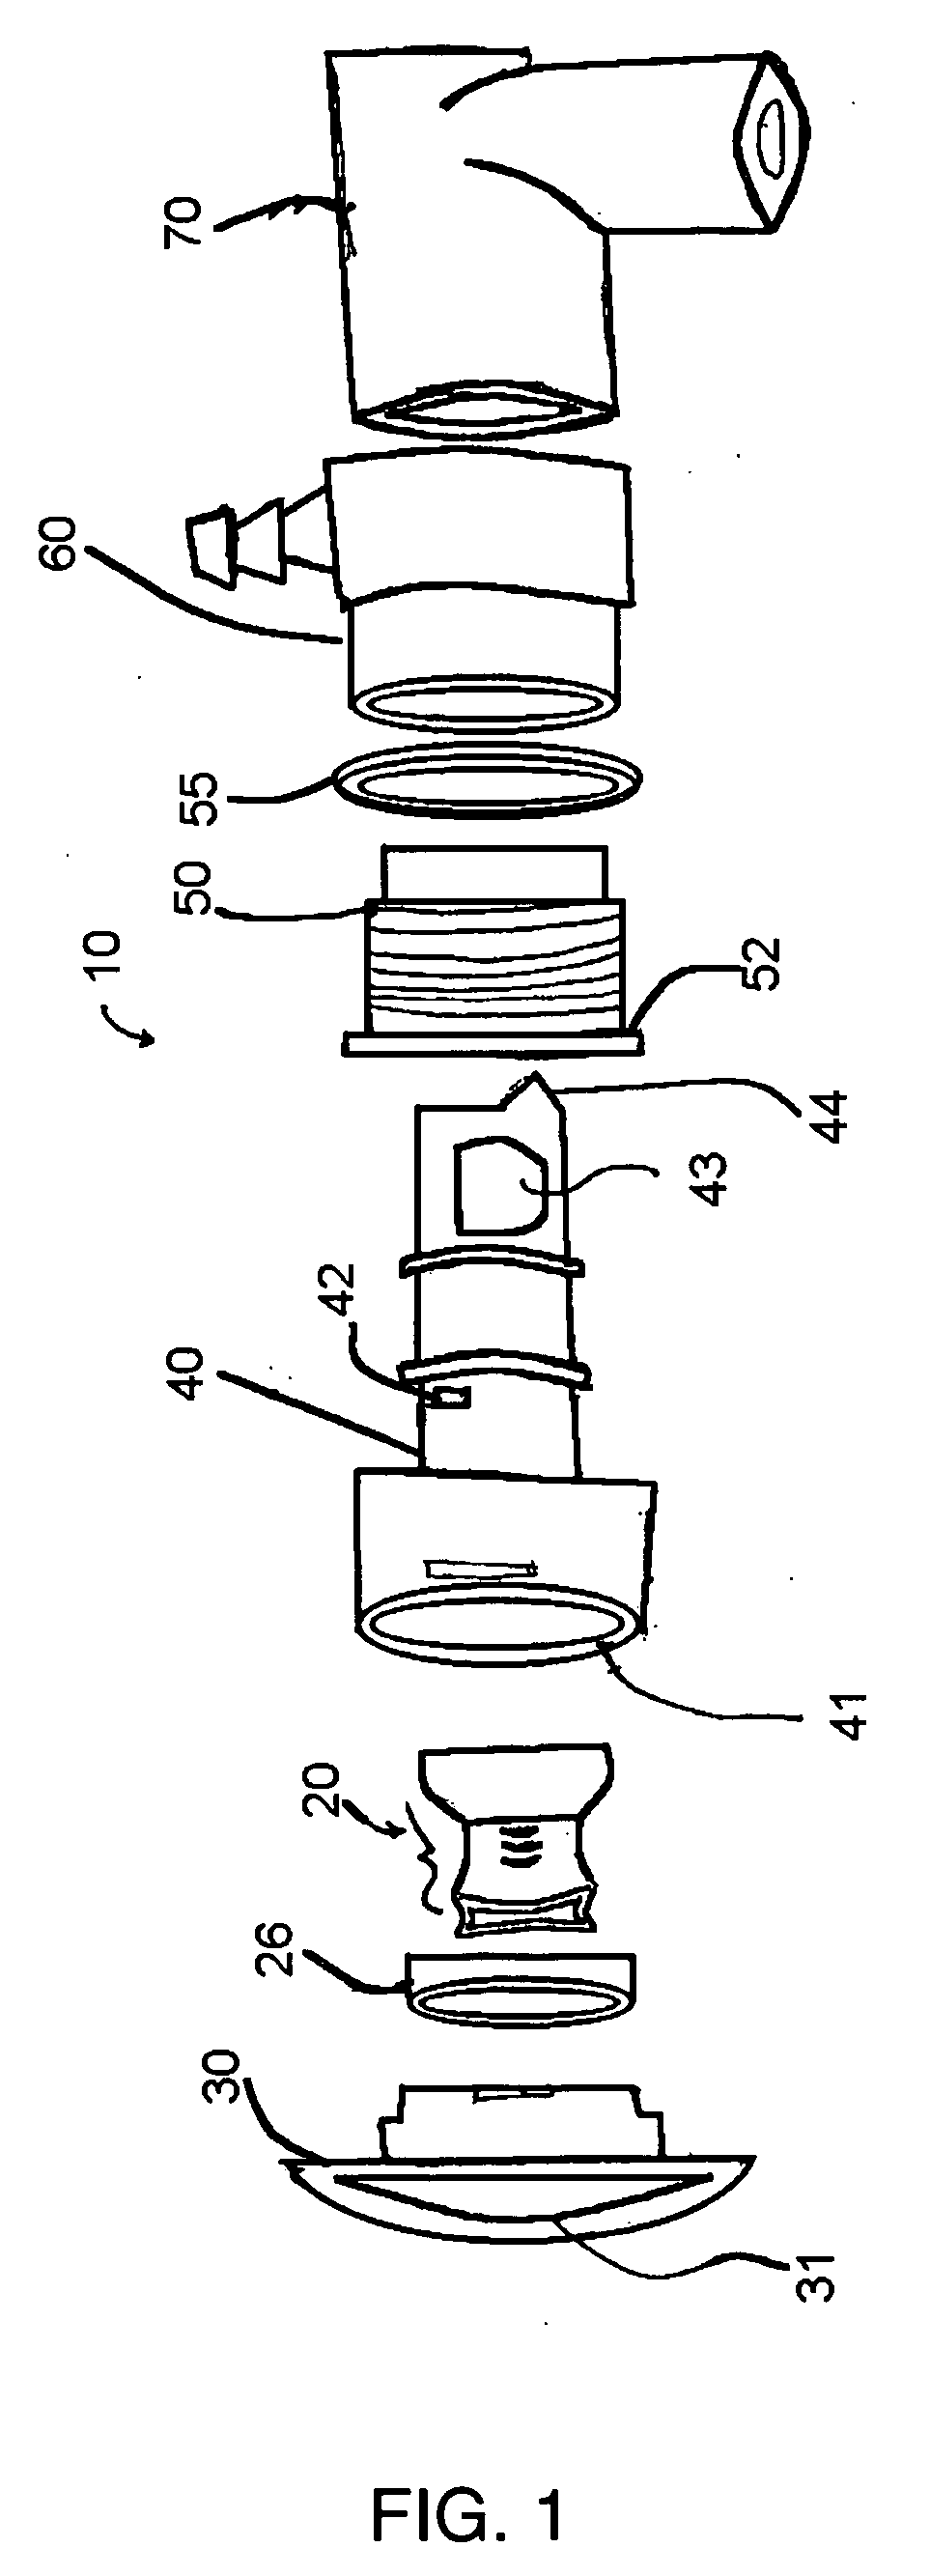 Water jet aerator with three-part body and with optional shaped nozzle